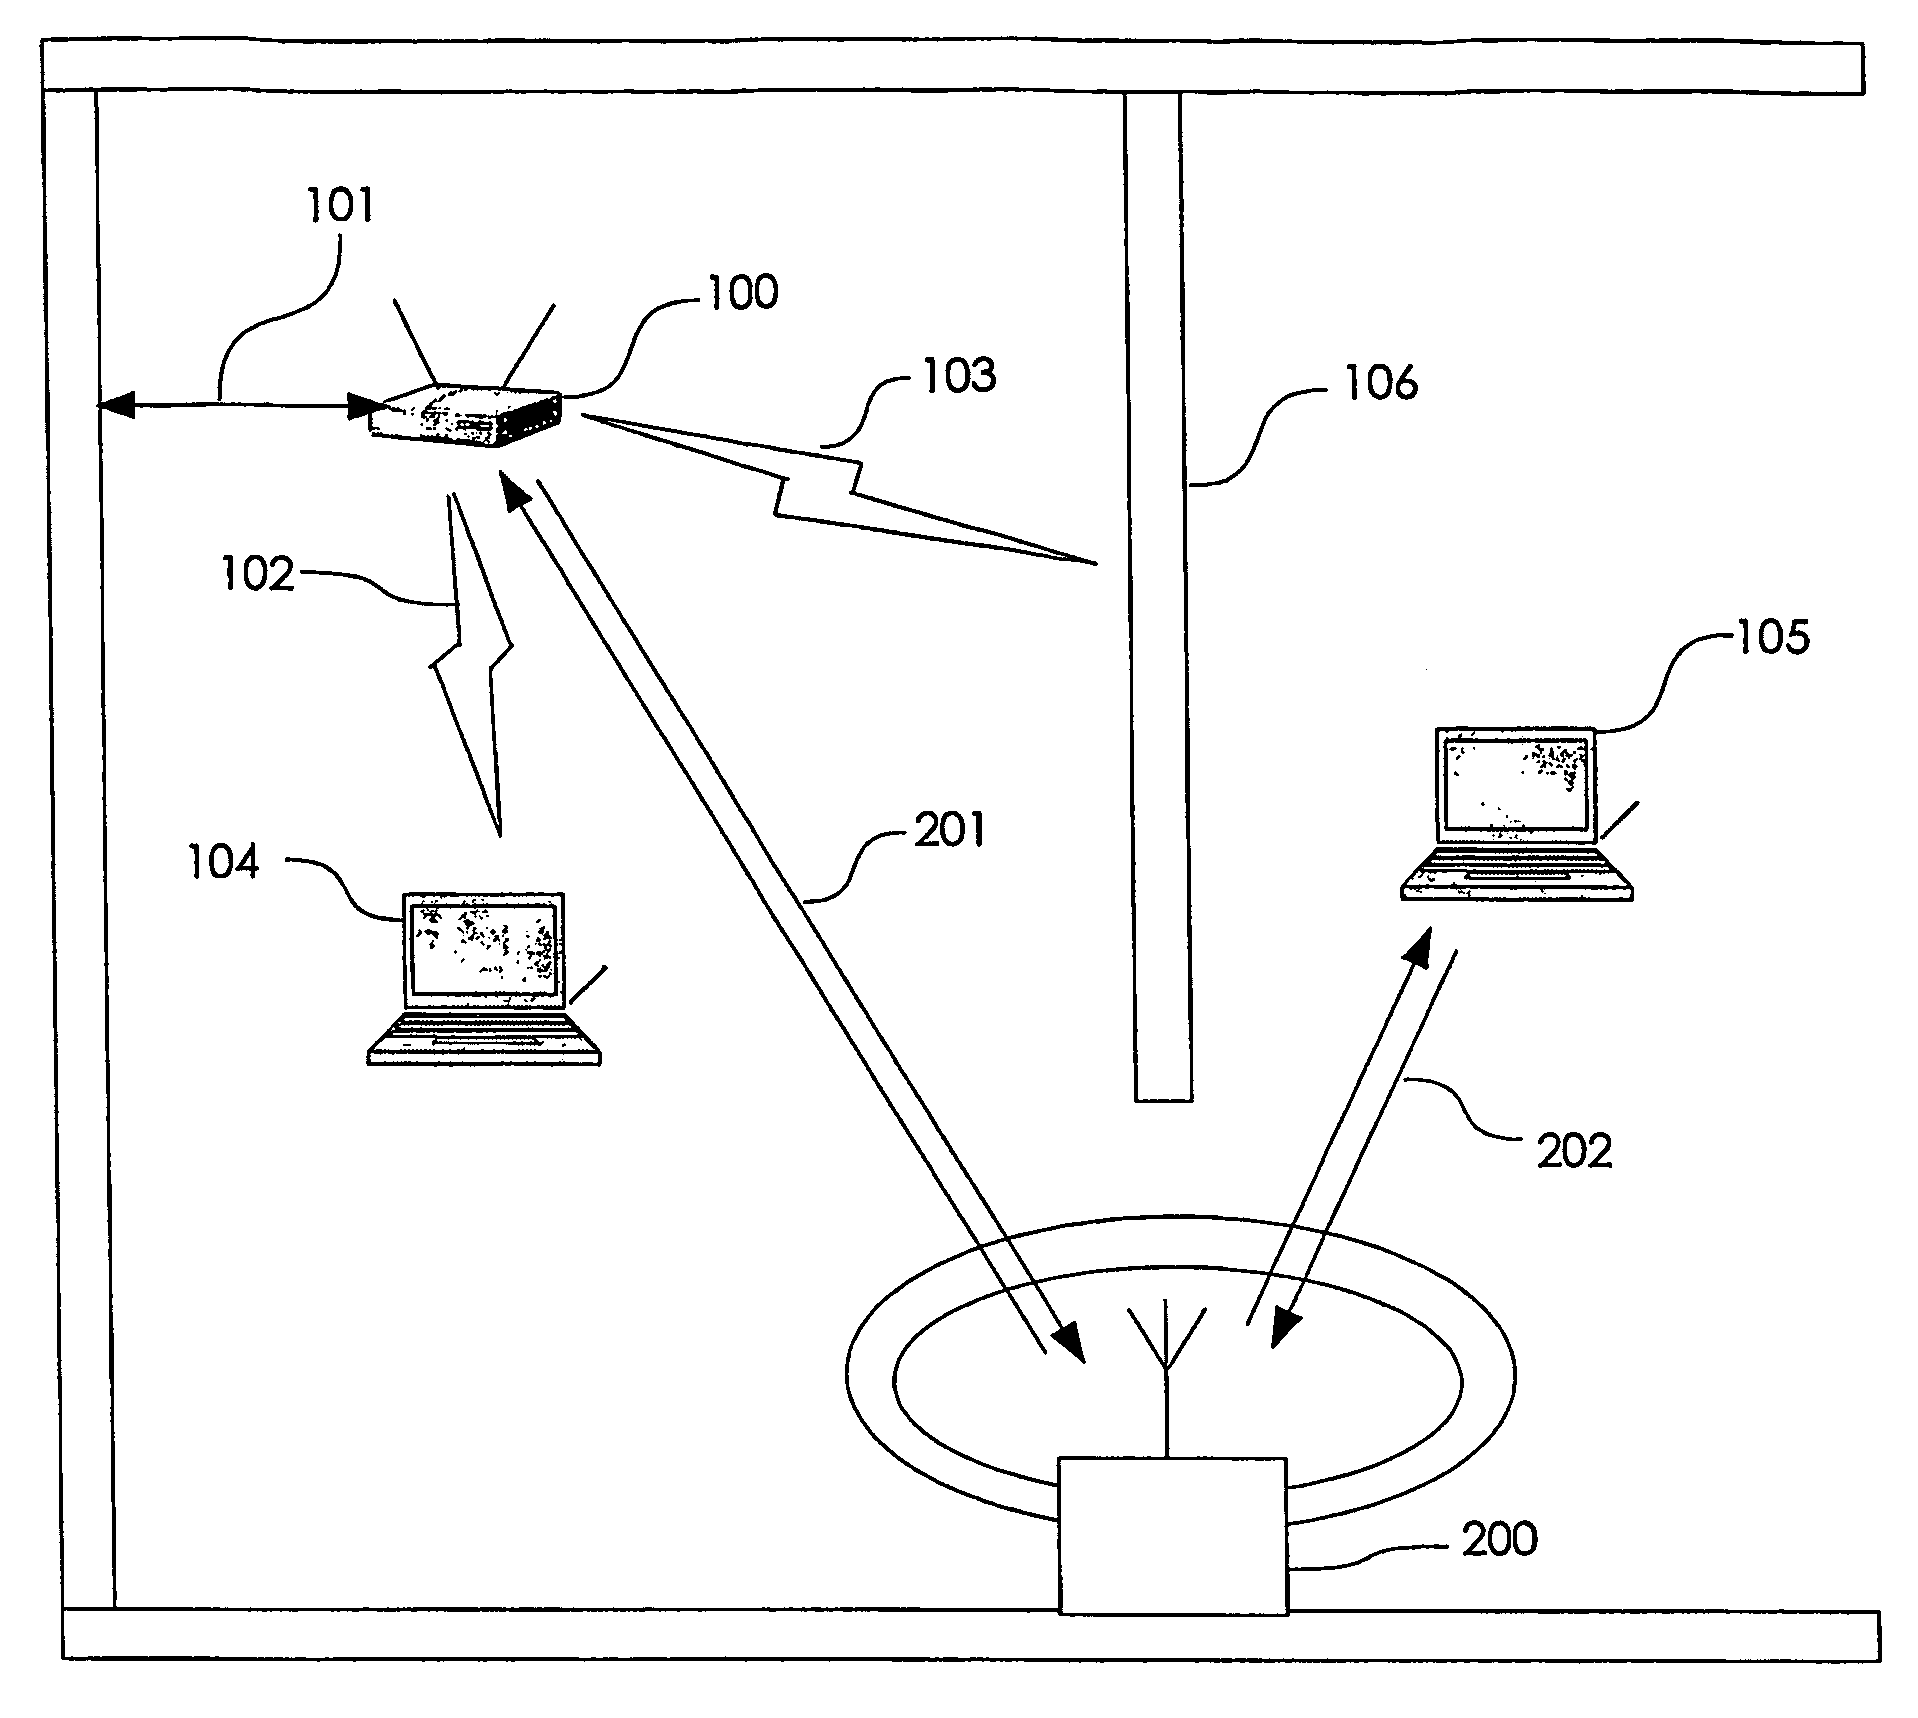 Wireless network repeater